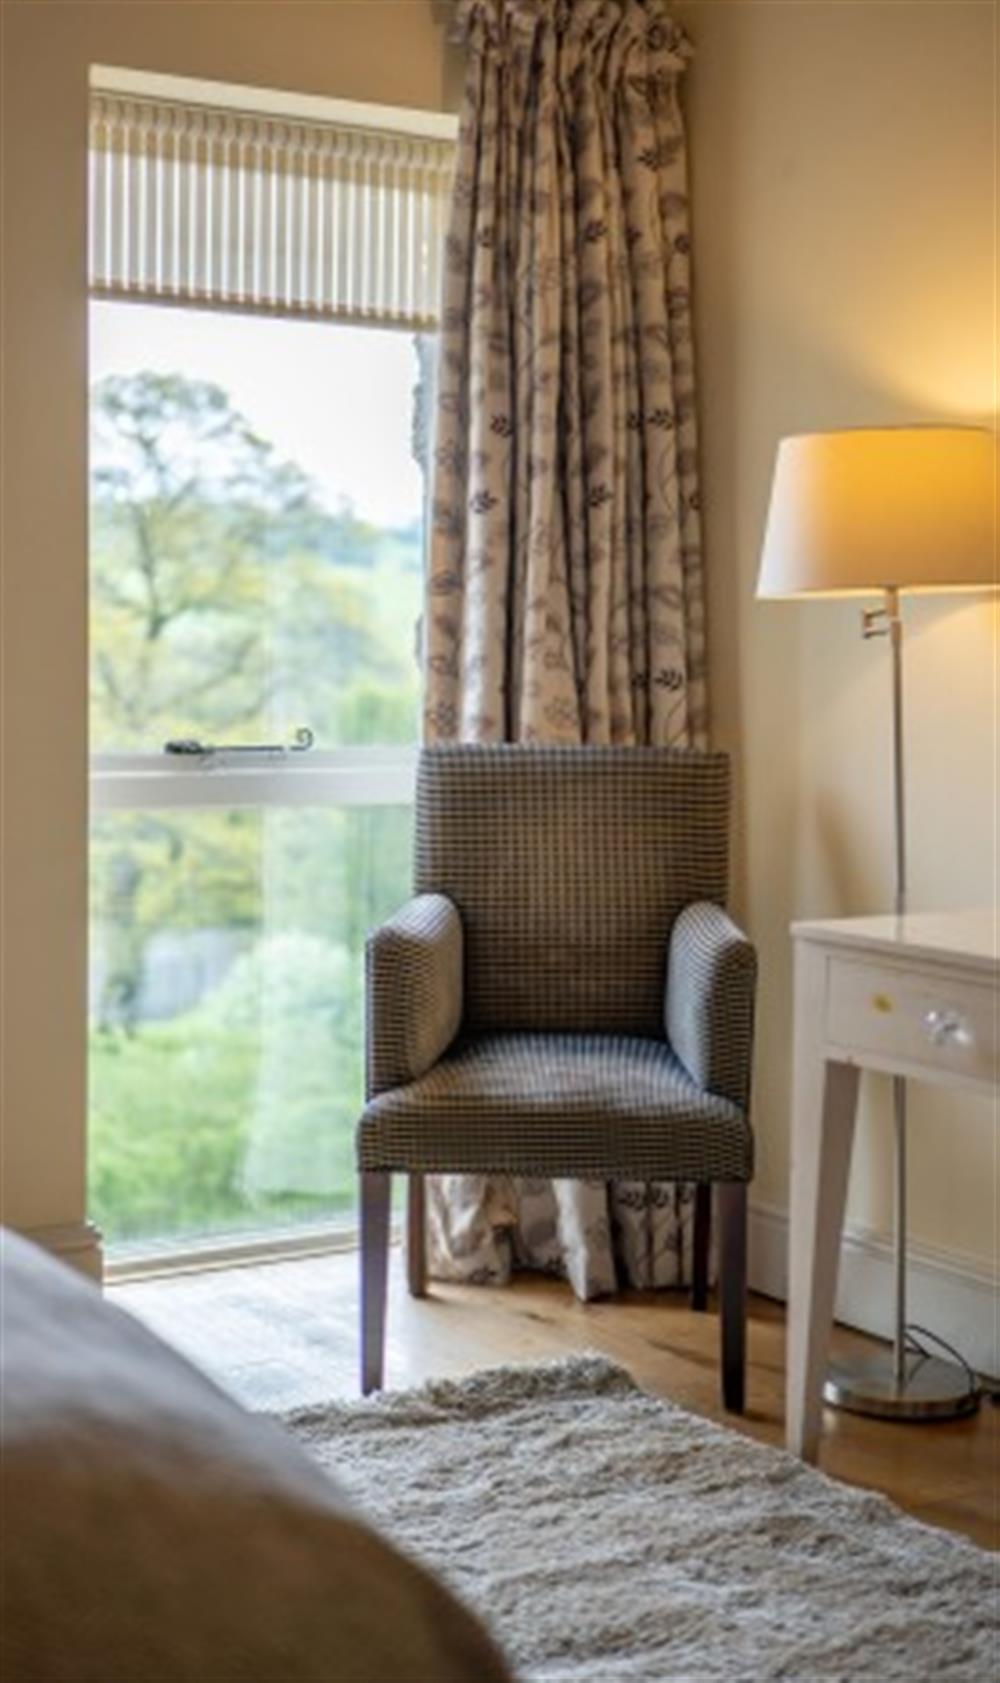 Bedroom 1 with armchair and views over surrounding scenery at Cox Tor in Chagford